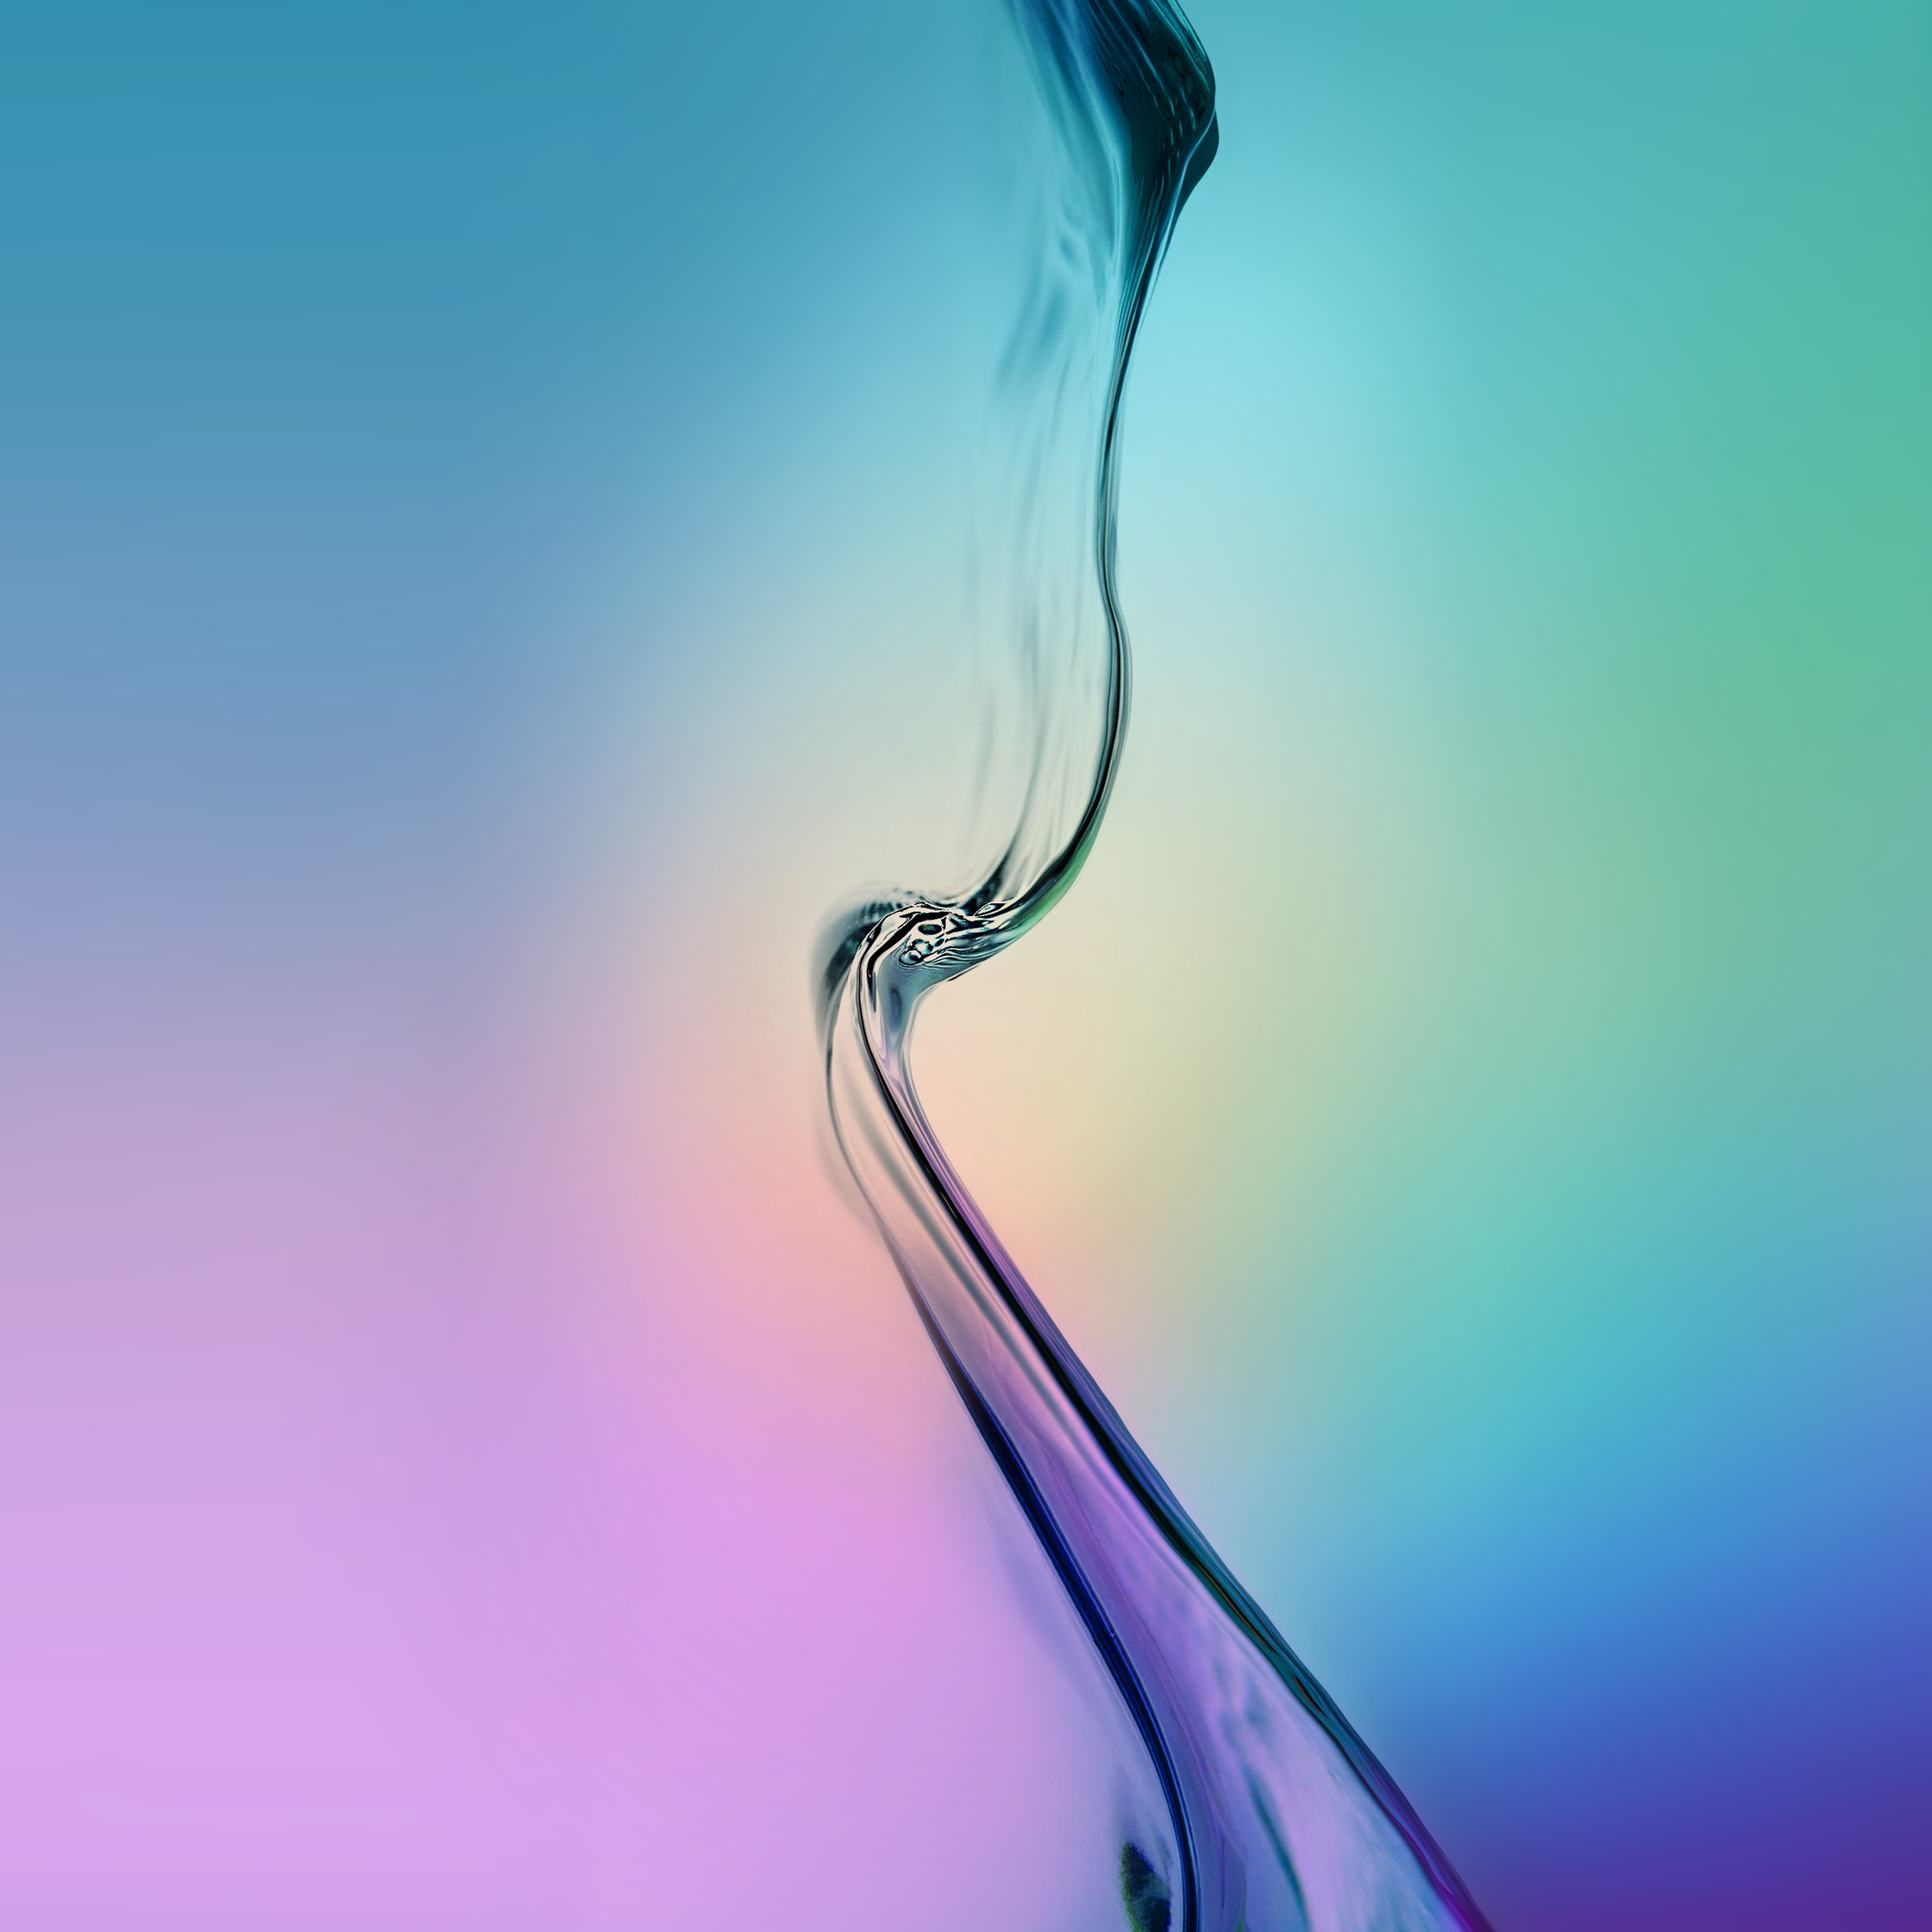 Default Samsung Galaxy S6 and S6 Edge wallpapers show up download 2240x2240